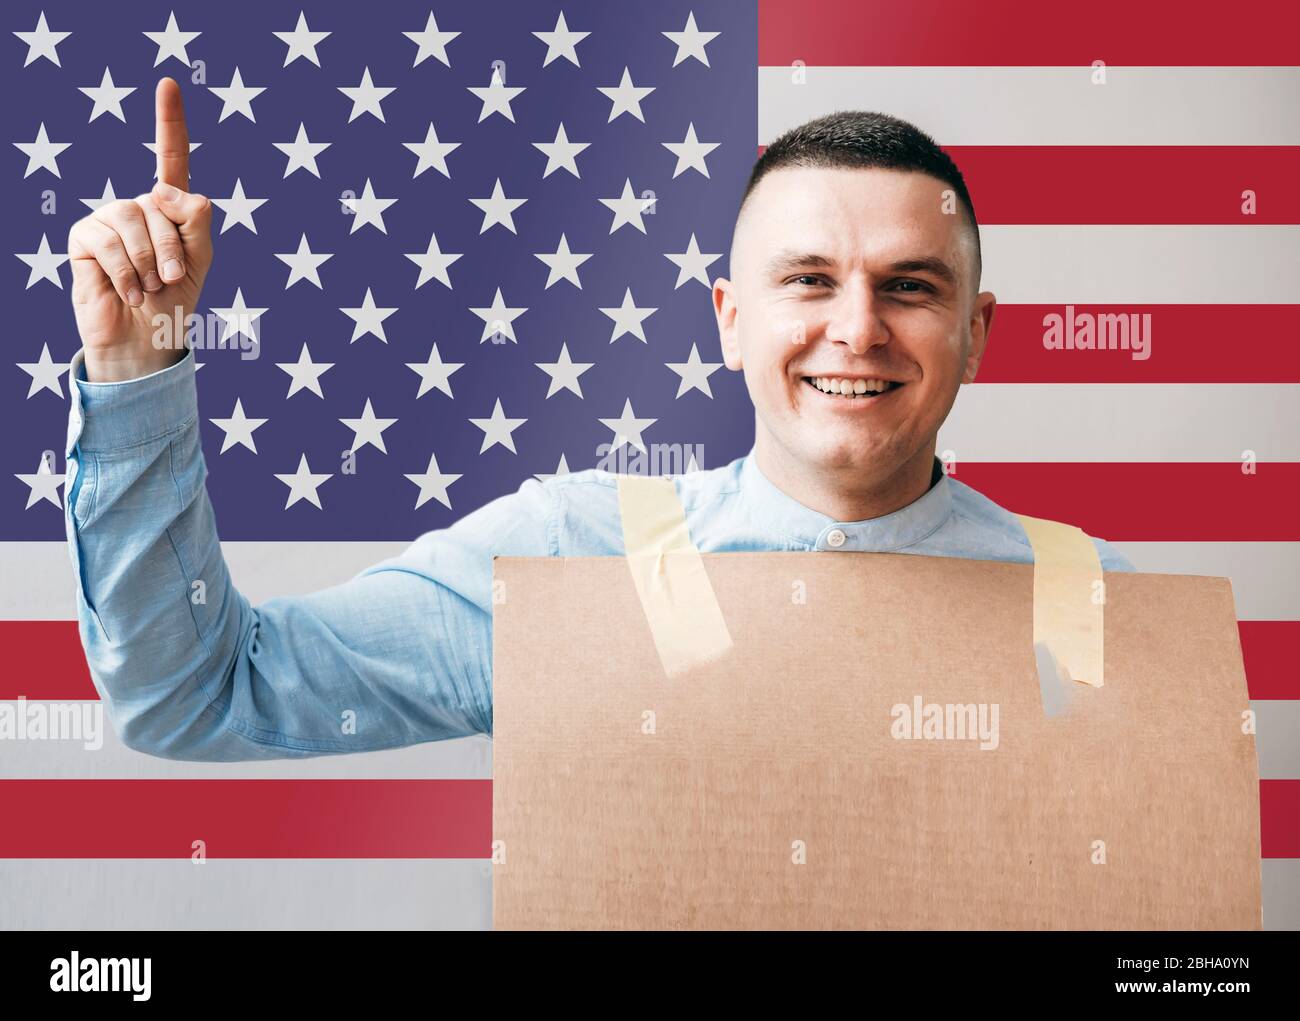 Man with arm raised holding sign with mock-up American flag in background Stock Photo